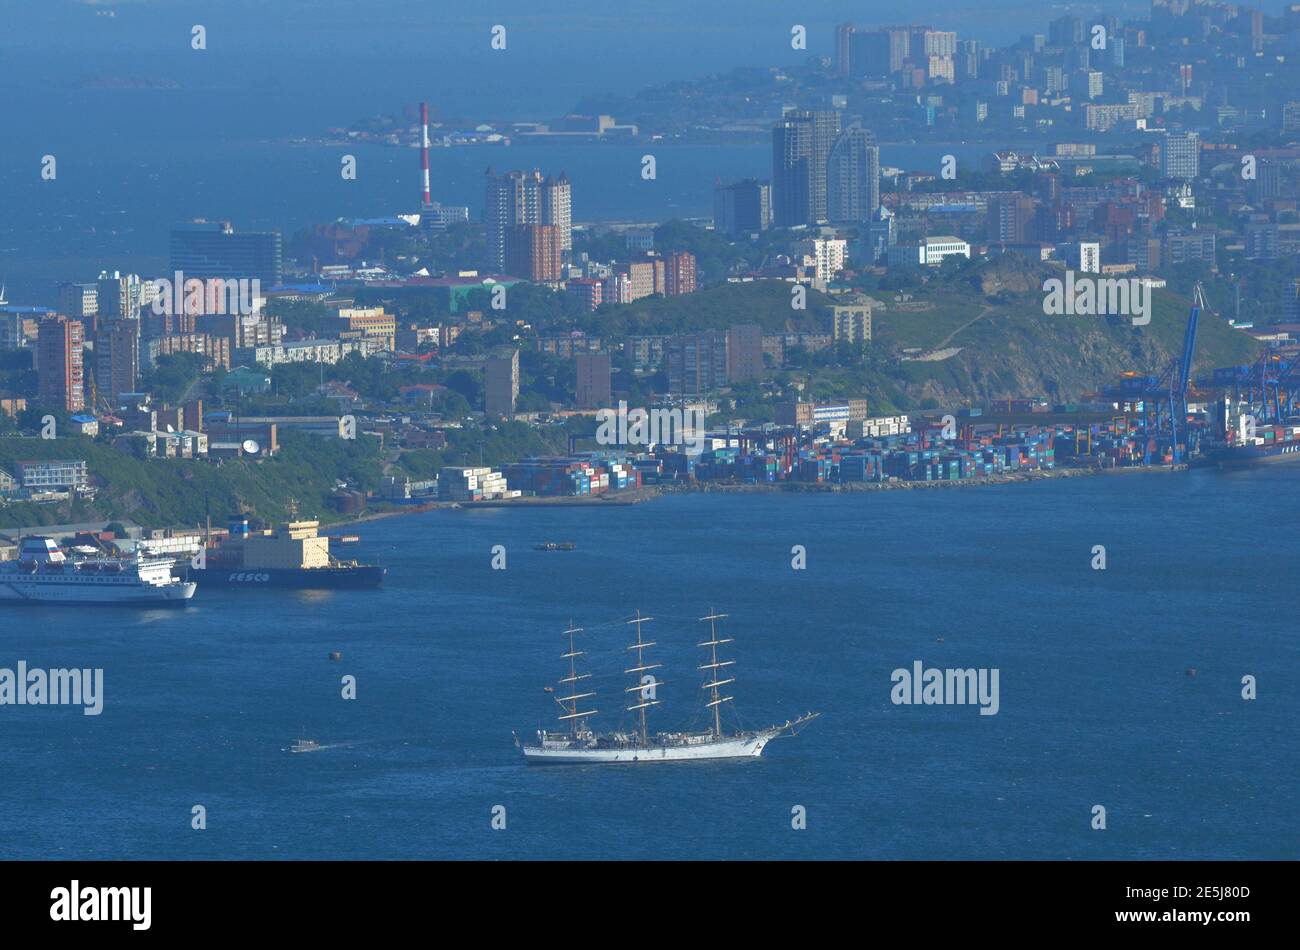 An aerial view of Russia's far eastern city of Vladivostok is seen from Russky Island September 4, 2011. The Pacific Island of Russky near Vladivostok will host the 2012 summit of the APEC Asia-Pacific Economic Co-operation bloc. REUTERS/Yuri Maltsev (RUSSIA - Tags: ENVIRONMENT TRAVEL BUSINESS SOCIETY) Stock Photo